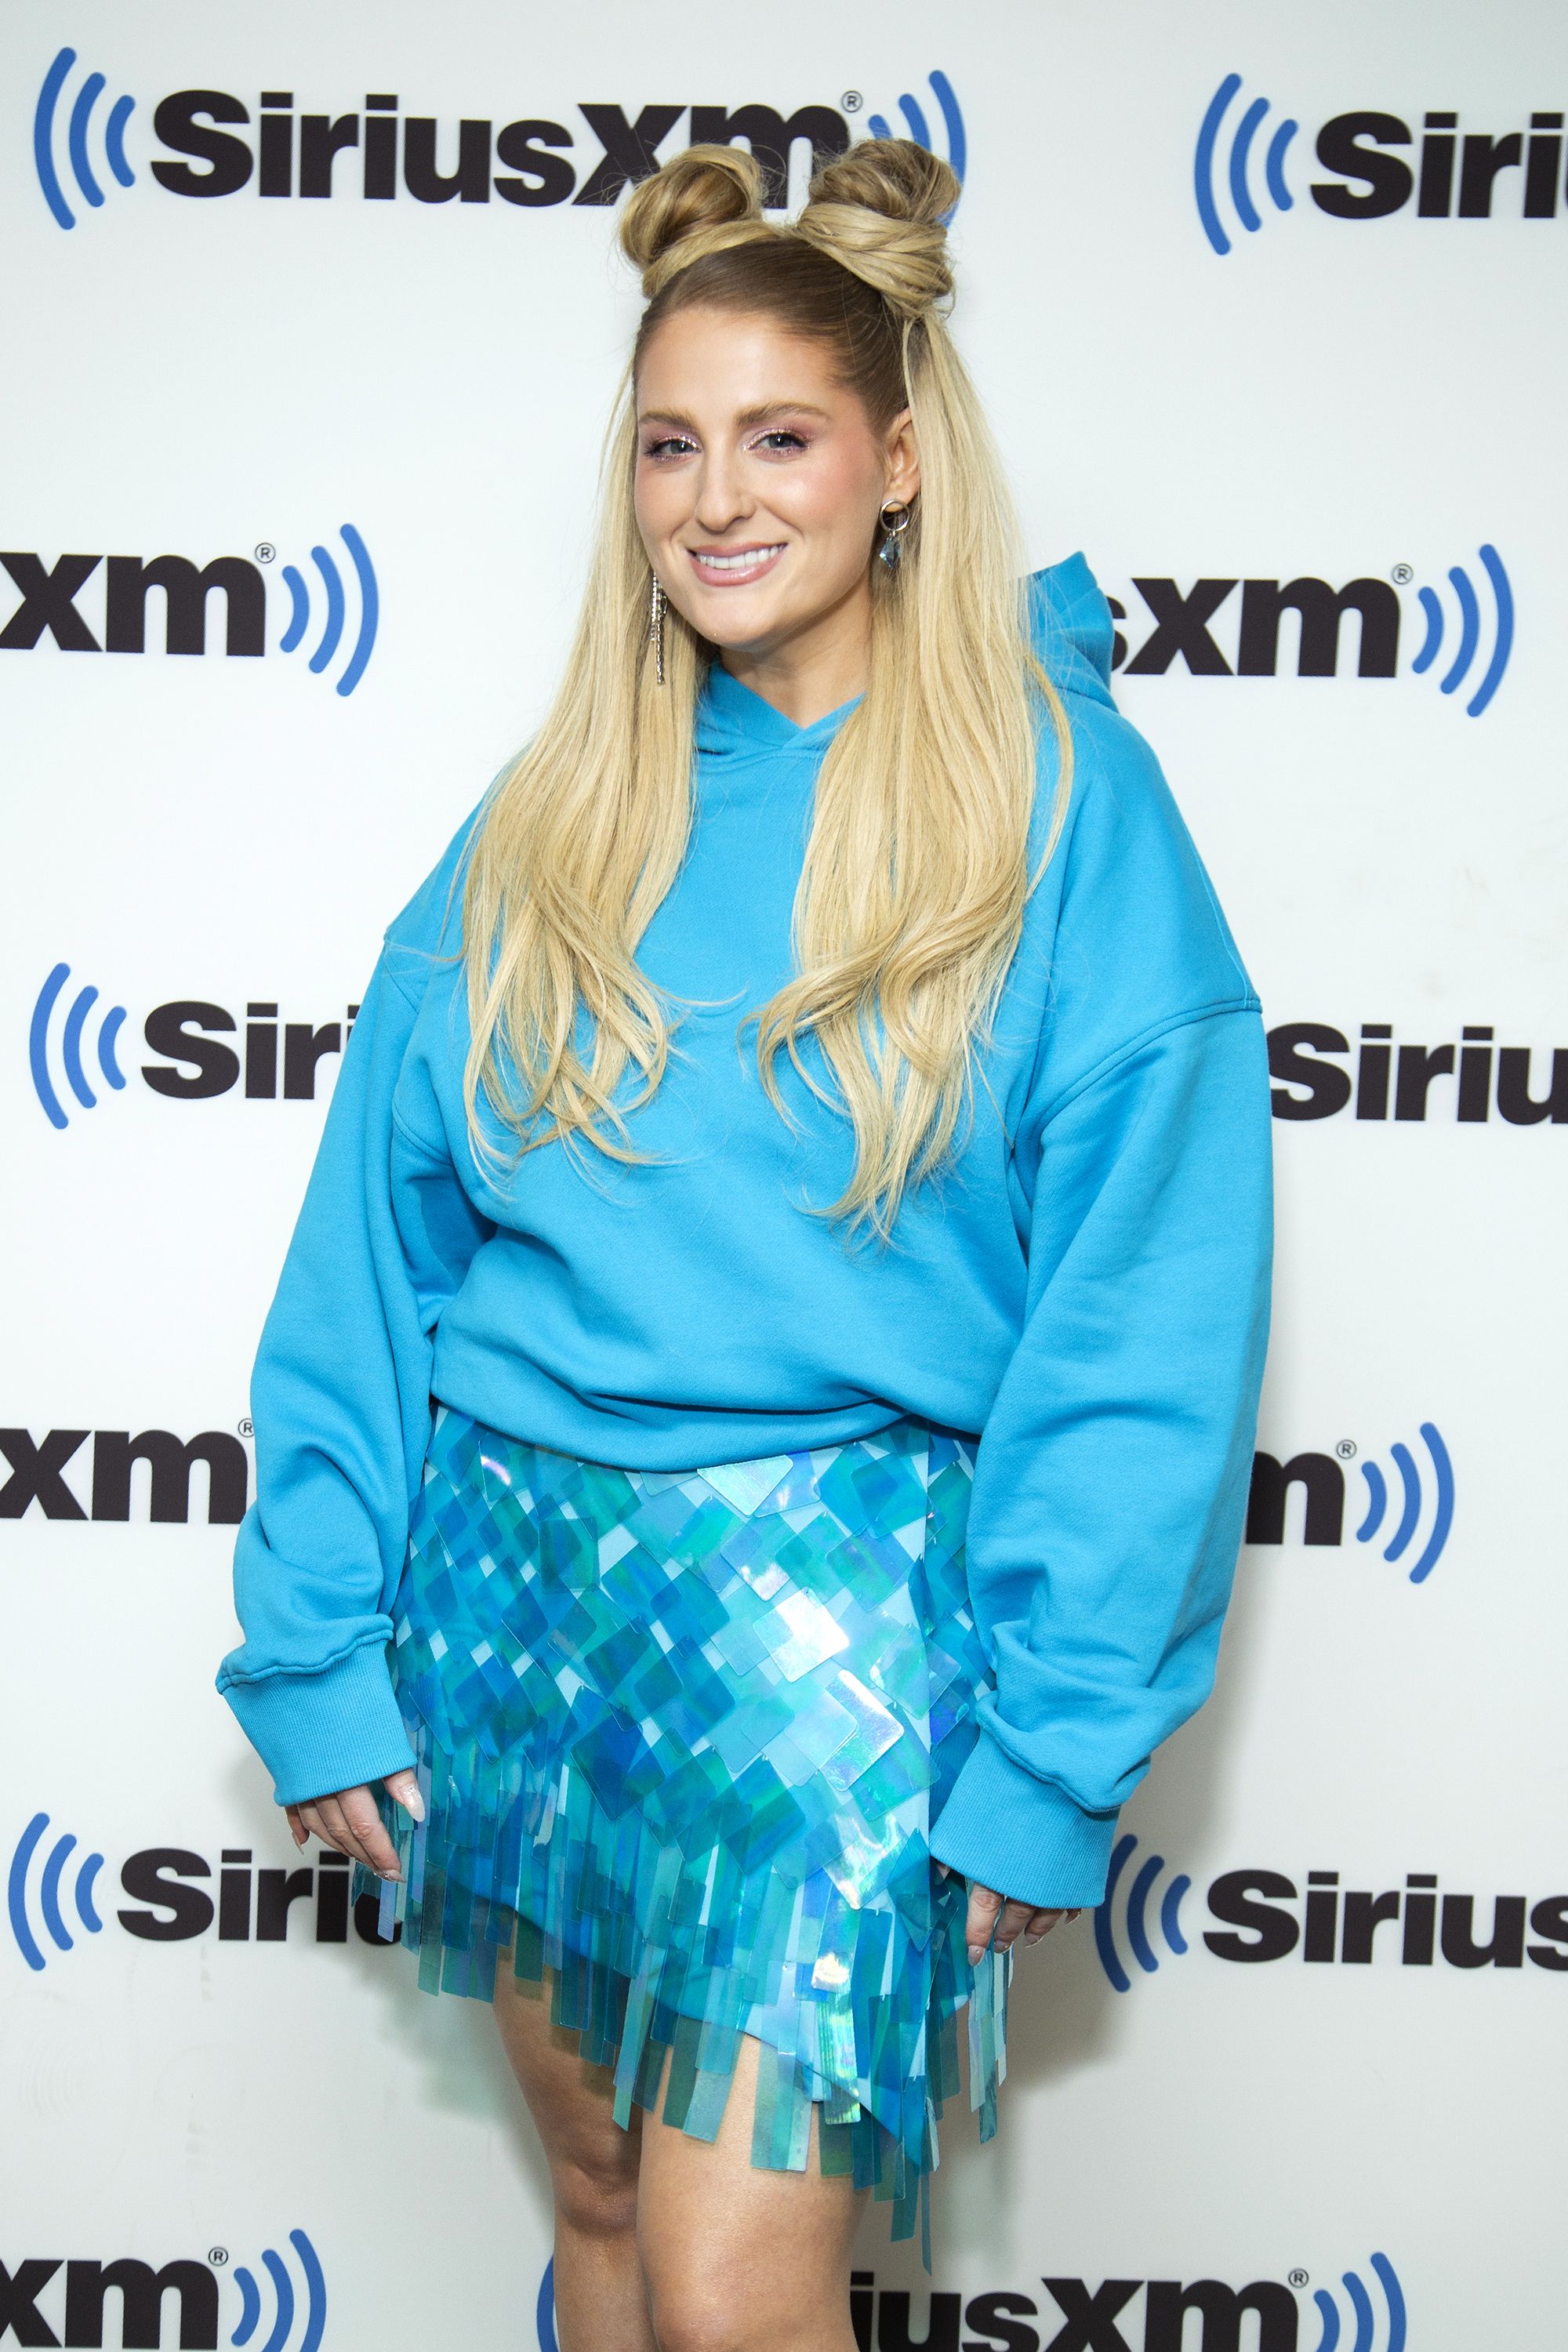 Meghan Trainor looks unrecognizable after 60lbs weight loss transformation